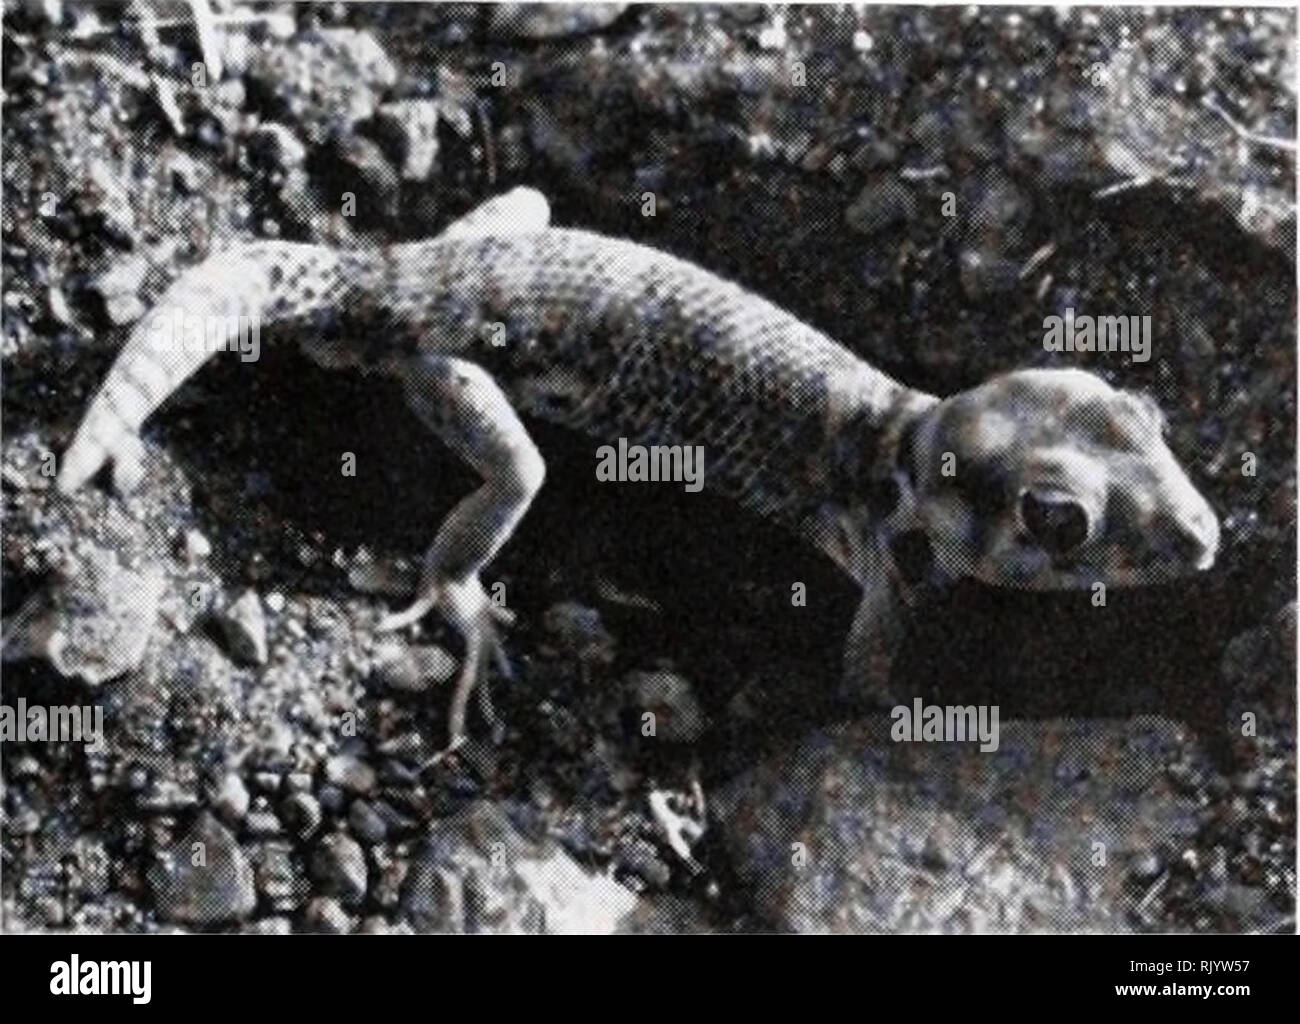 . Asiatic herpetological research. Reptiles -- Asia Periodicals; Amphibians -- Asia Periodicals. I February 1992 Asiatic Herpetological Research Vol.4, pp. 99-112| On the Ecology of Przewalsky's Gecko (Teratoscincus przewalskii) in the Transaltai Gobi, Mongolia DIMITRI V. SEMENOV1 AND LEO J. BORKIN2 xSevertzov Institute of Evolutionary Animal Morphology and Ecology, Russian Academy of Sciences, Moscow 117071, Russia department ofHerpetology, Zoological Institute, Russian Academy of Sciences, St. Petersburg 199034, Russia Abstract. -Przewalsky's Gecko {Teratoscincus przewalskii) is one of the l Stock Photo